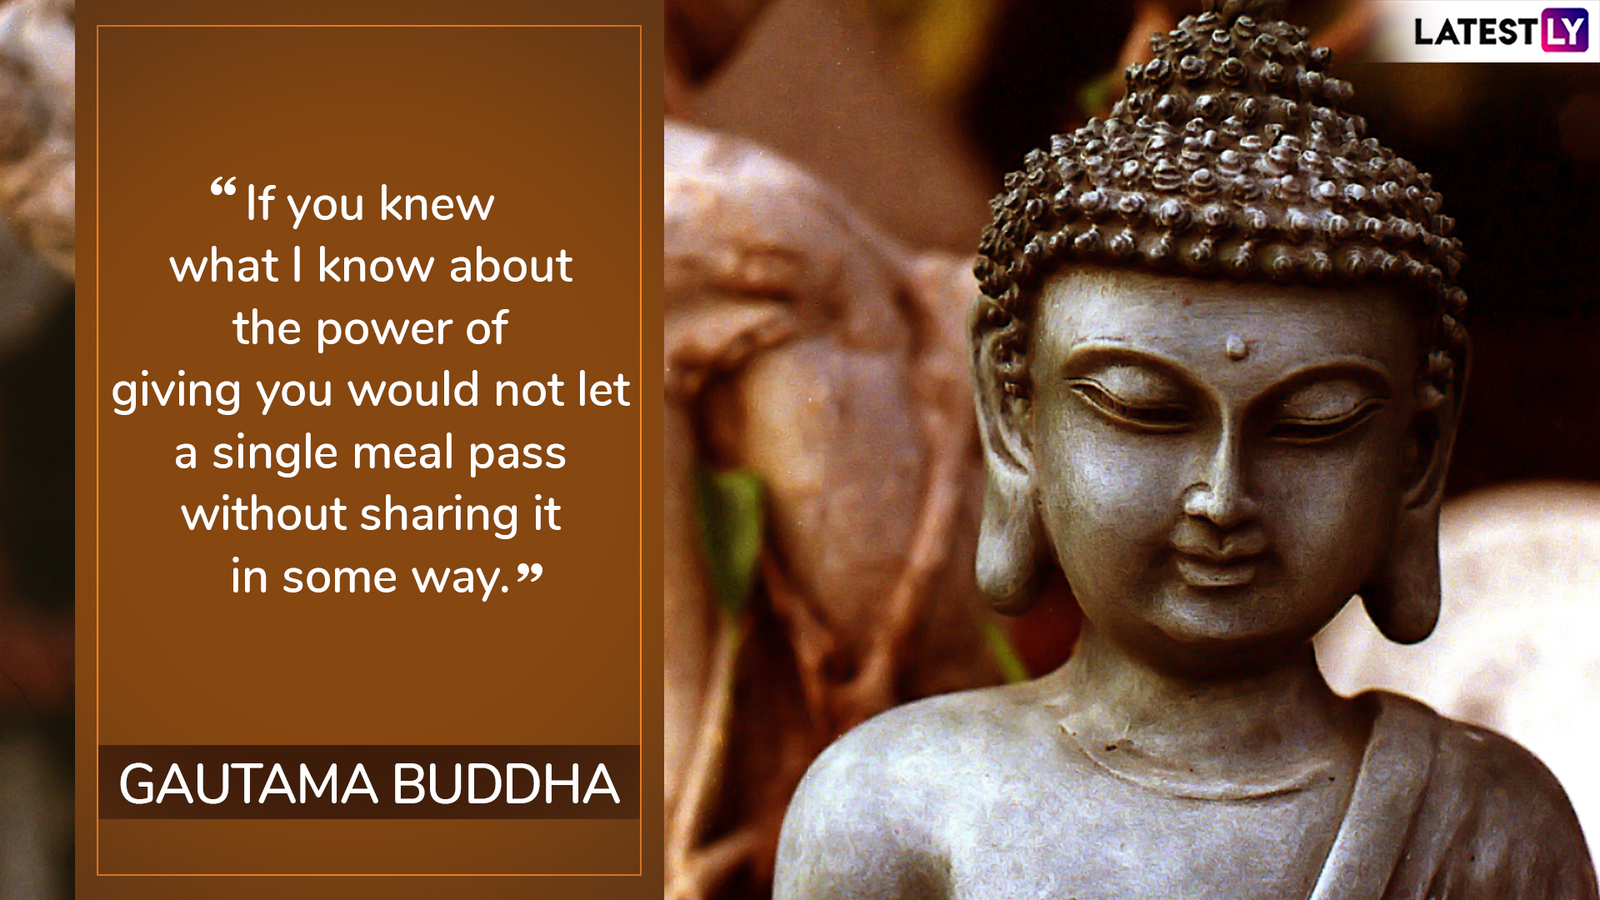 9-quotes-and-messages-share-these-inspirational-teachings-by-lord-buddha-to-celebrate-latestly-1.jpg